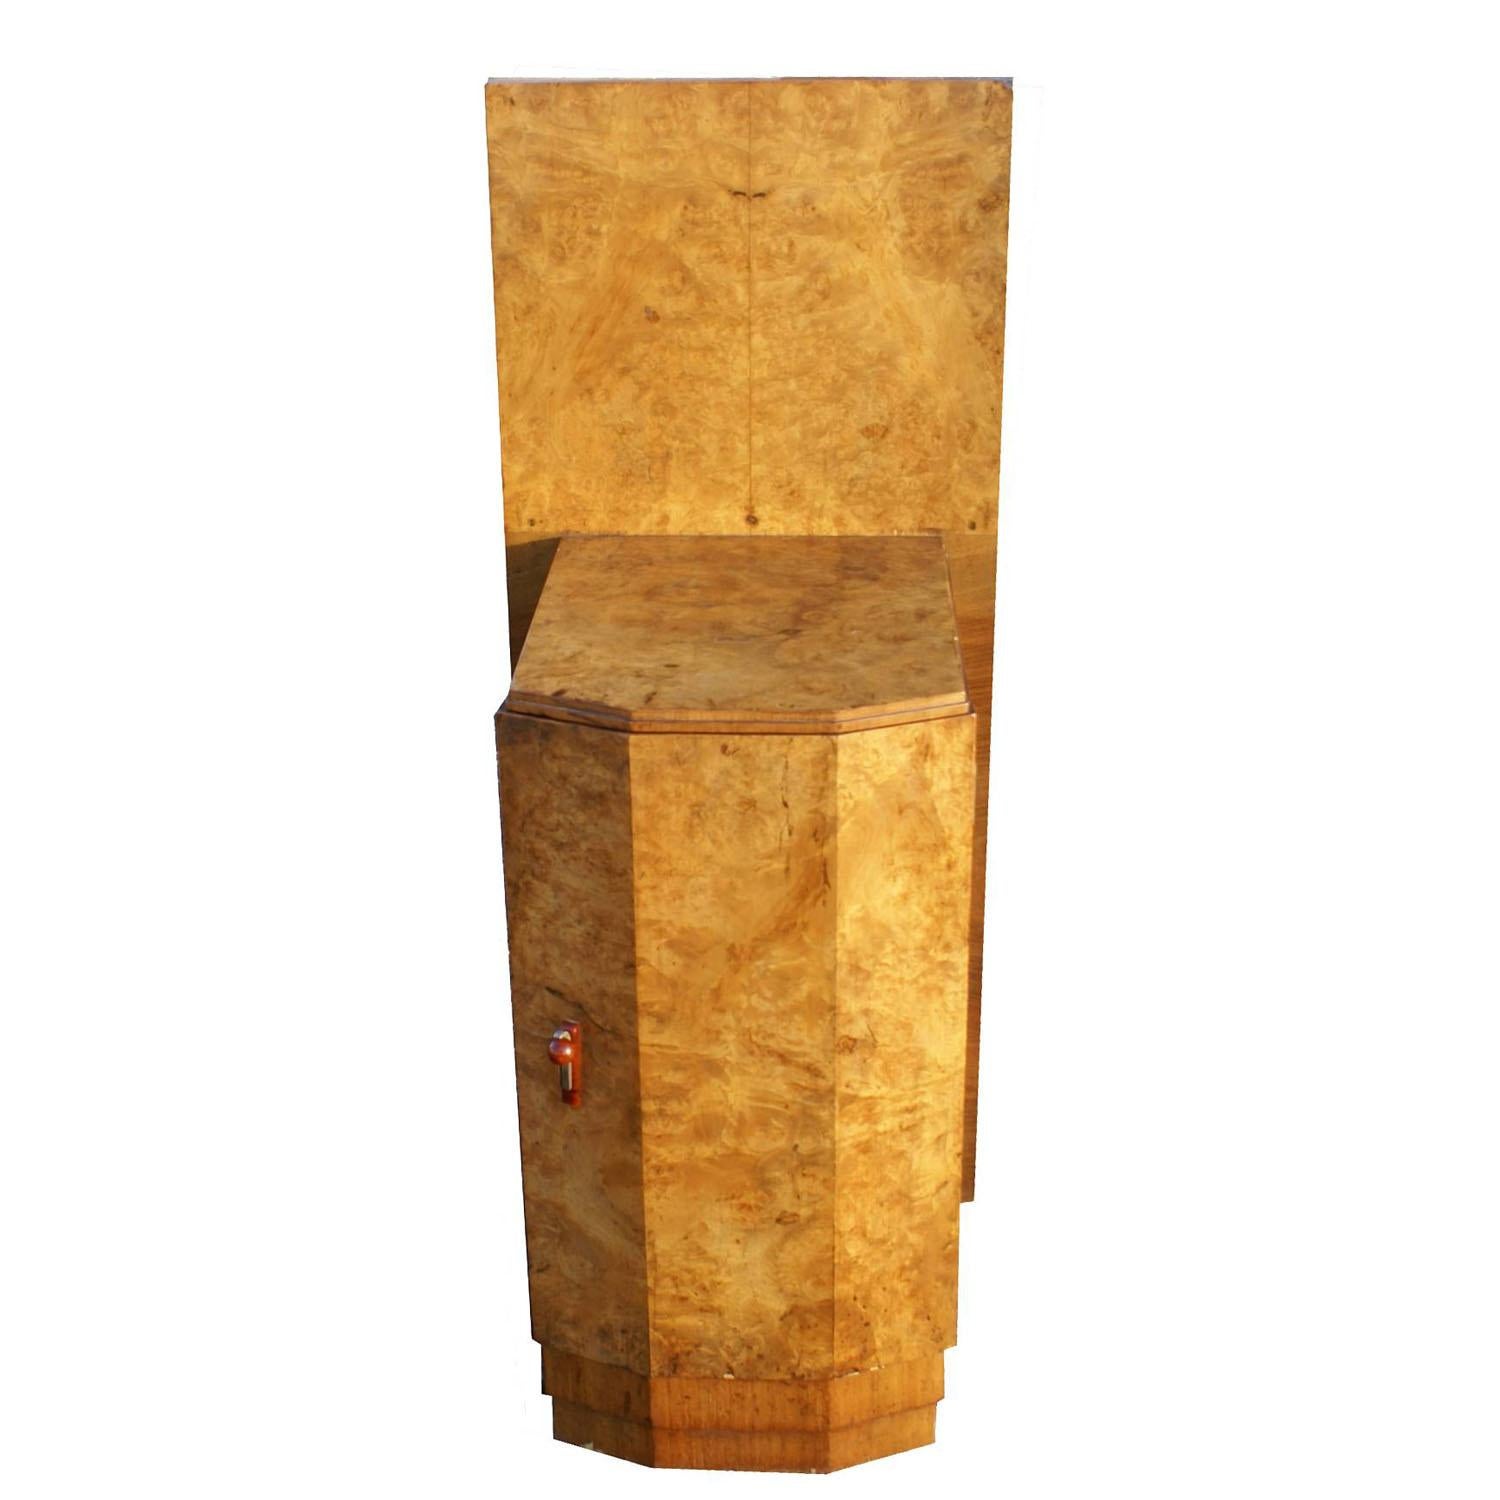 Art Deco style maple burl night stand cabinet
 
Cabinet opens to 1 drawer and shelving

Wood and Nichol Pulls

Measures: 17.75? Width x 18? Depth x 44? Height.